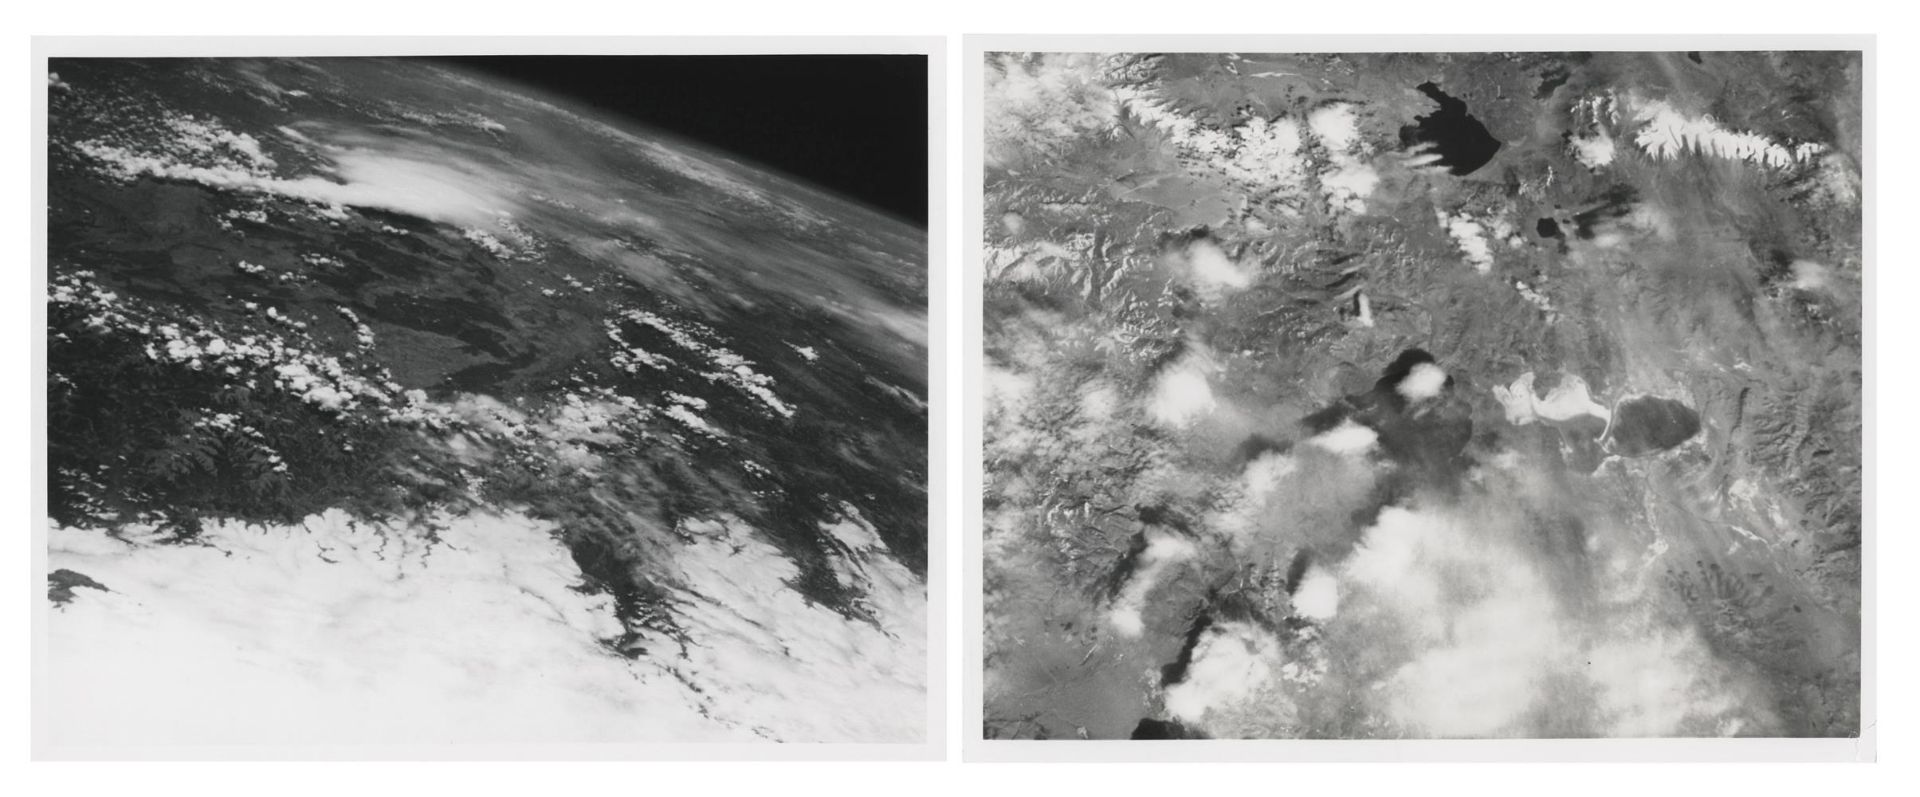 First Hasselblad photographs of the Earth from space (2 views), Mercury-Atlas 9, 15-16 May 1963